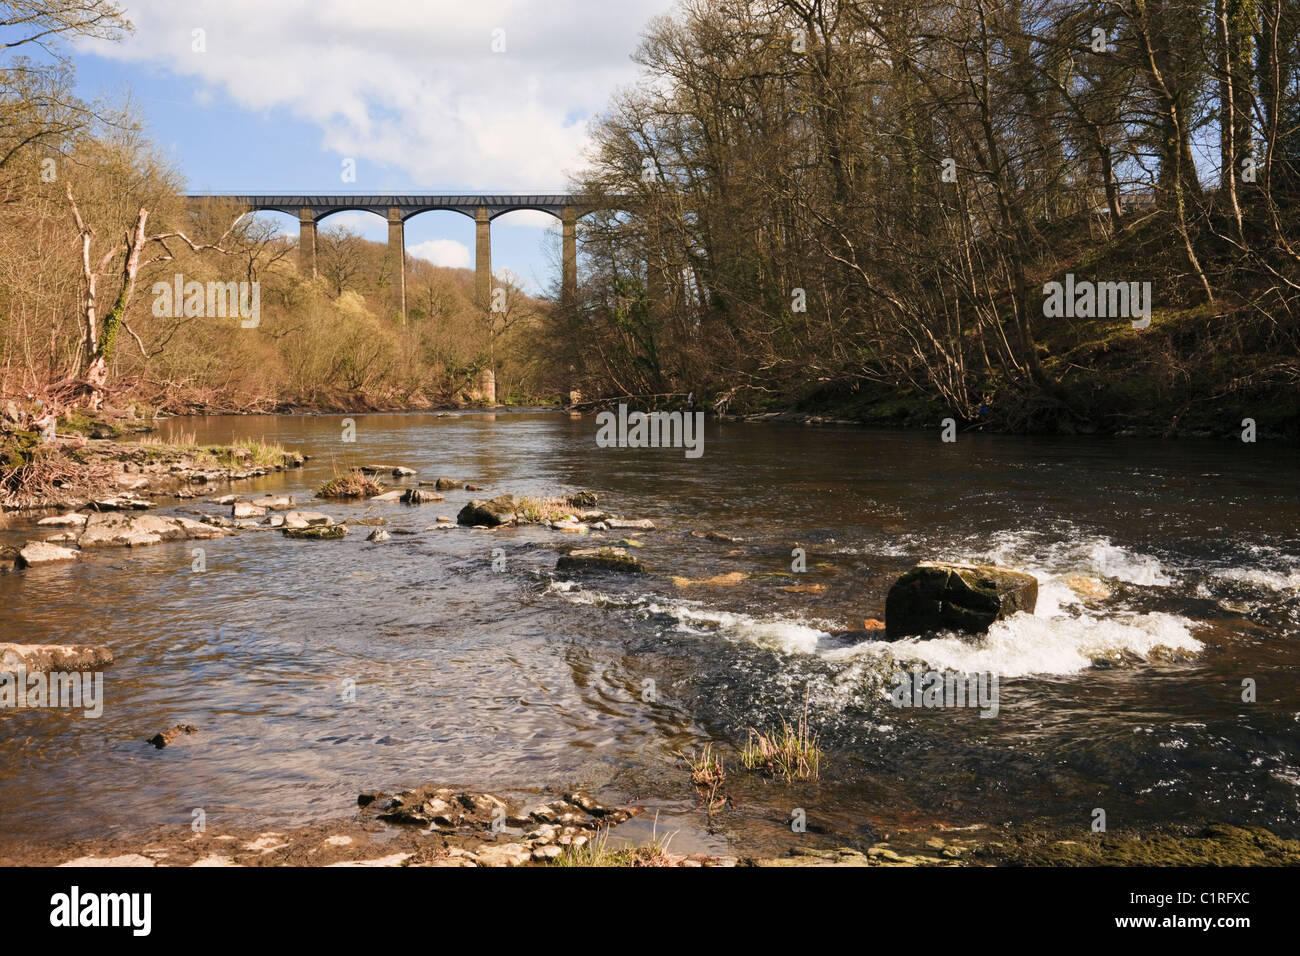 River Dee valley and Pontcysyllte Aqueduct carrying the Llangollen Canal.Trevor, Wrexham, North Wales, UK Stock Photo